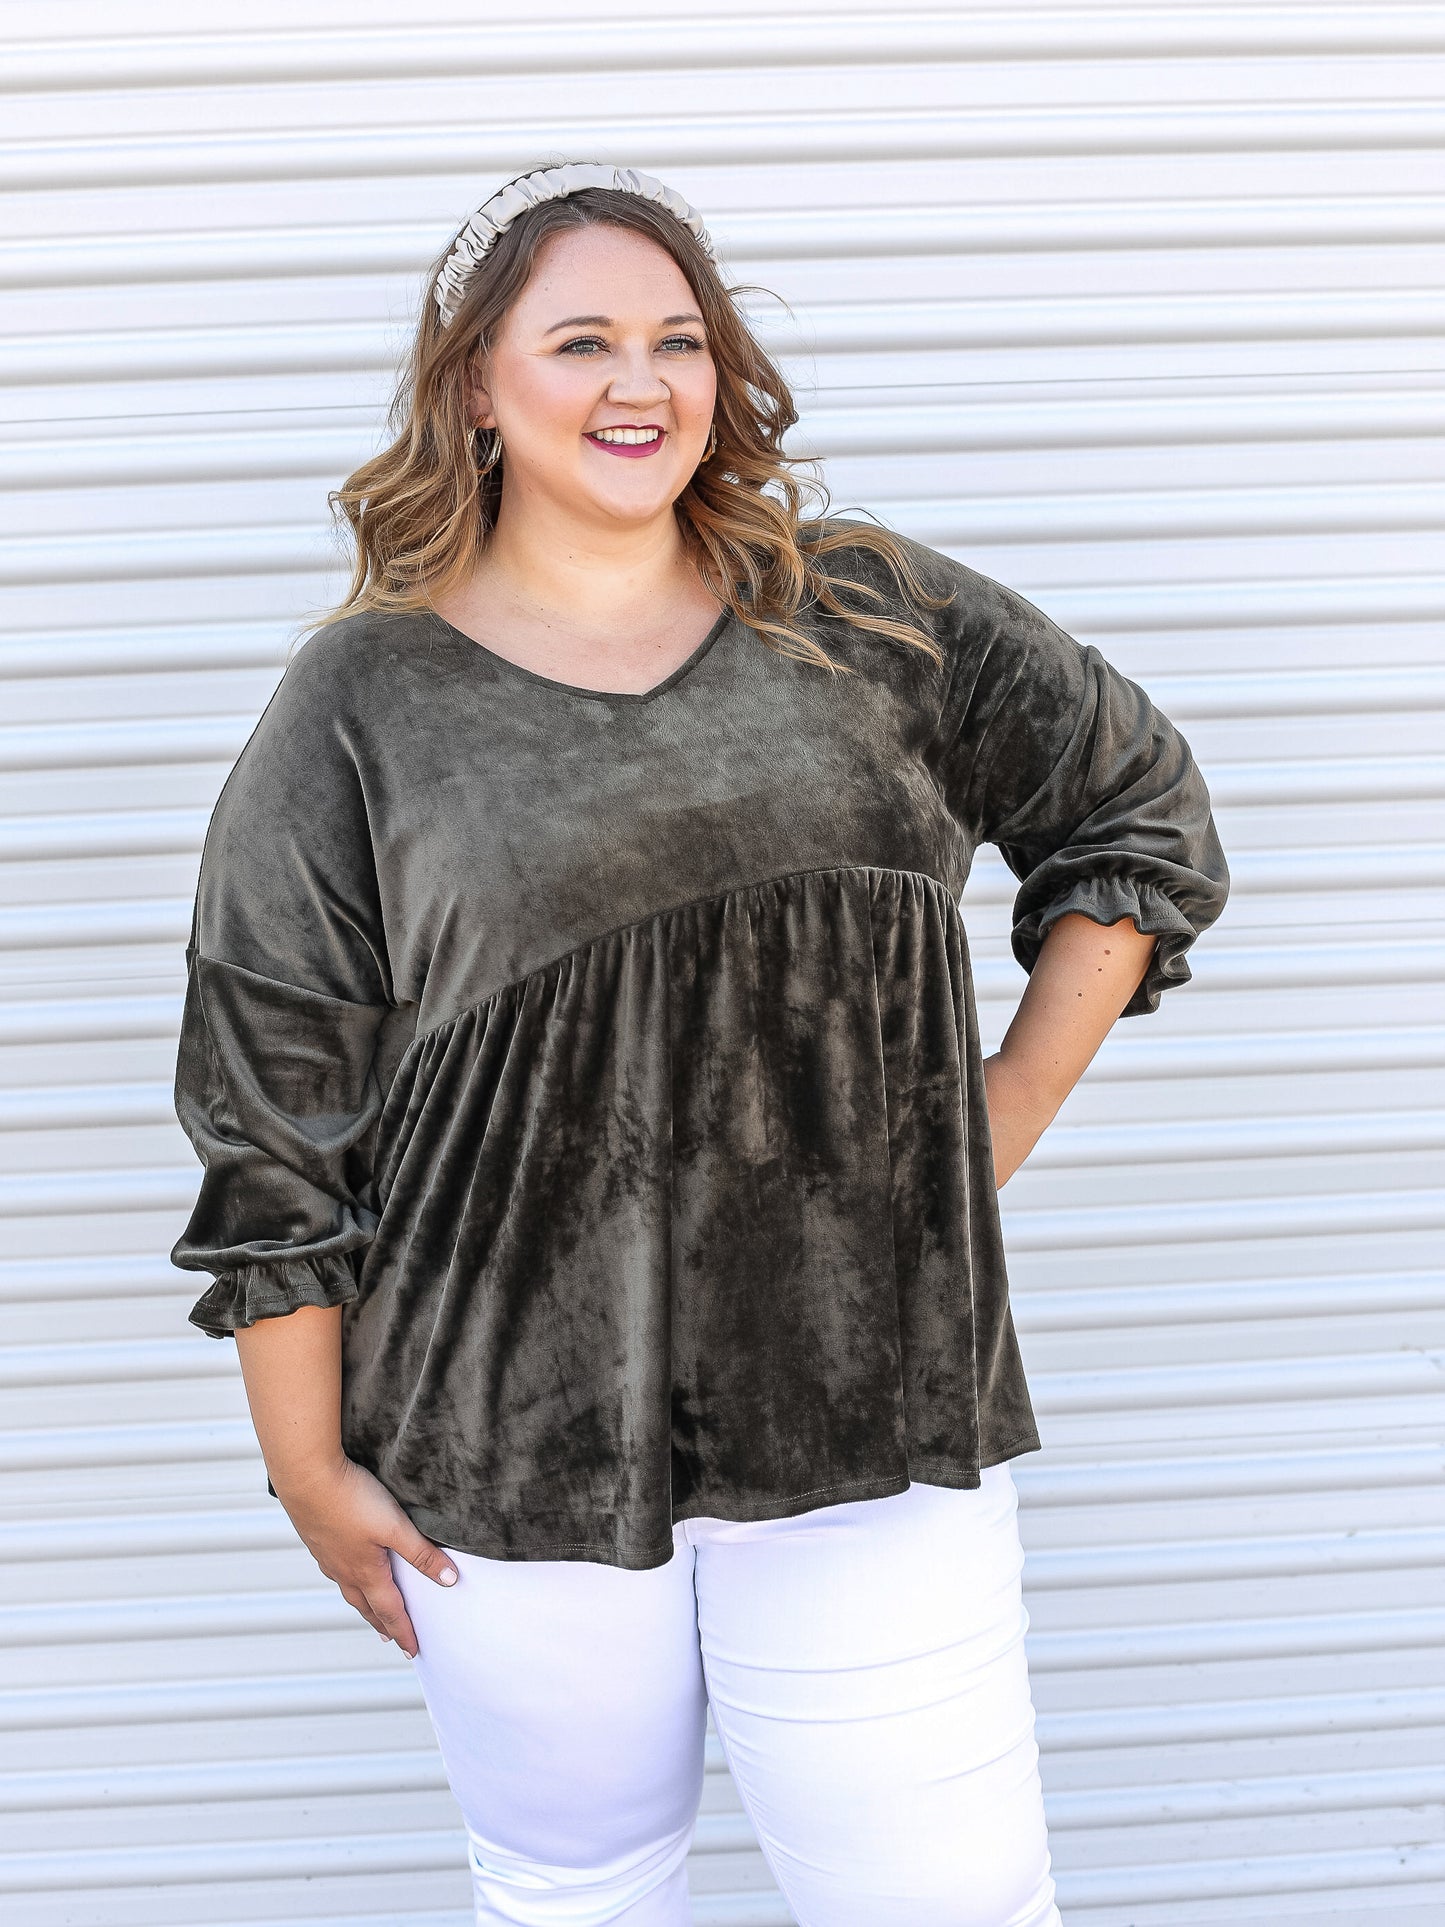 Olive green baby doll top with white denim